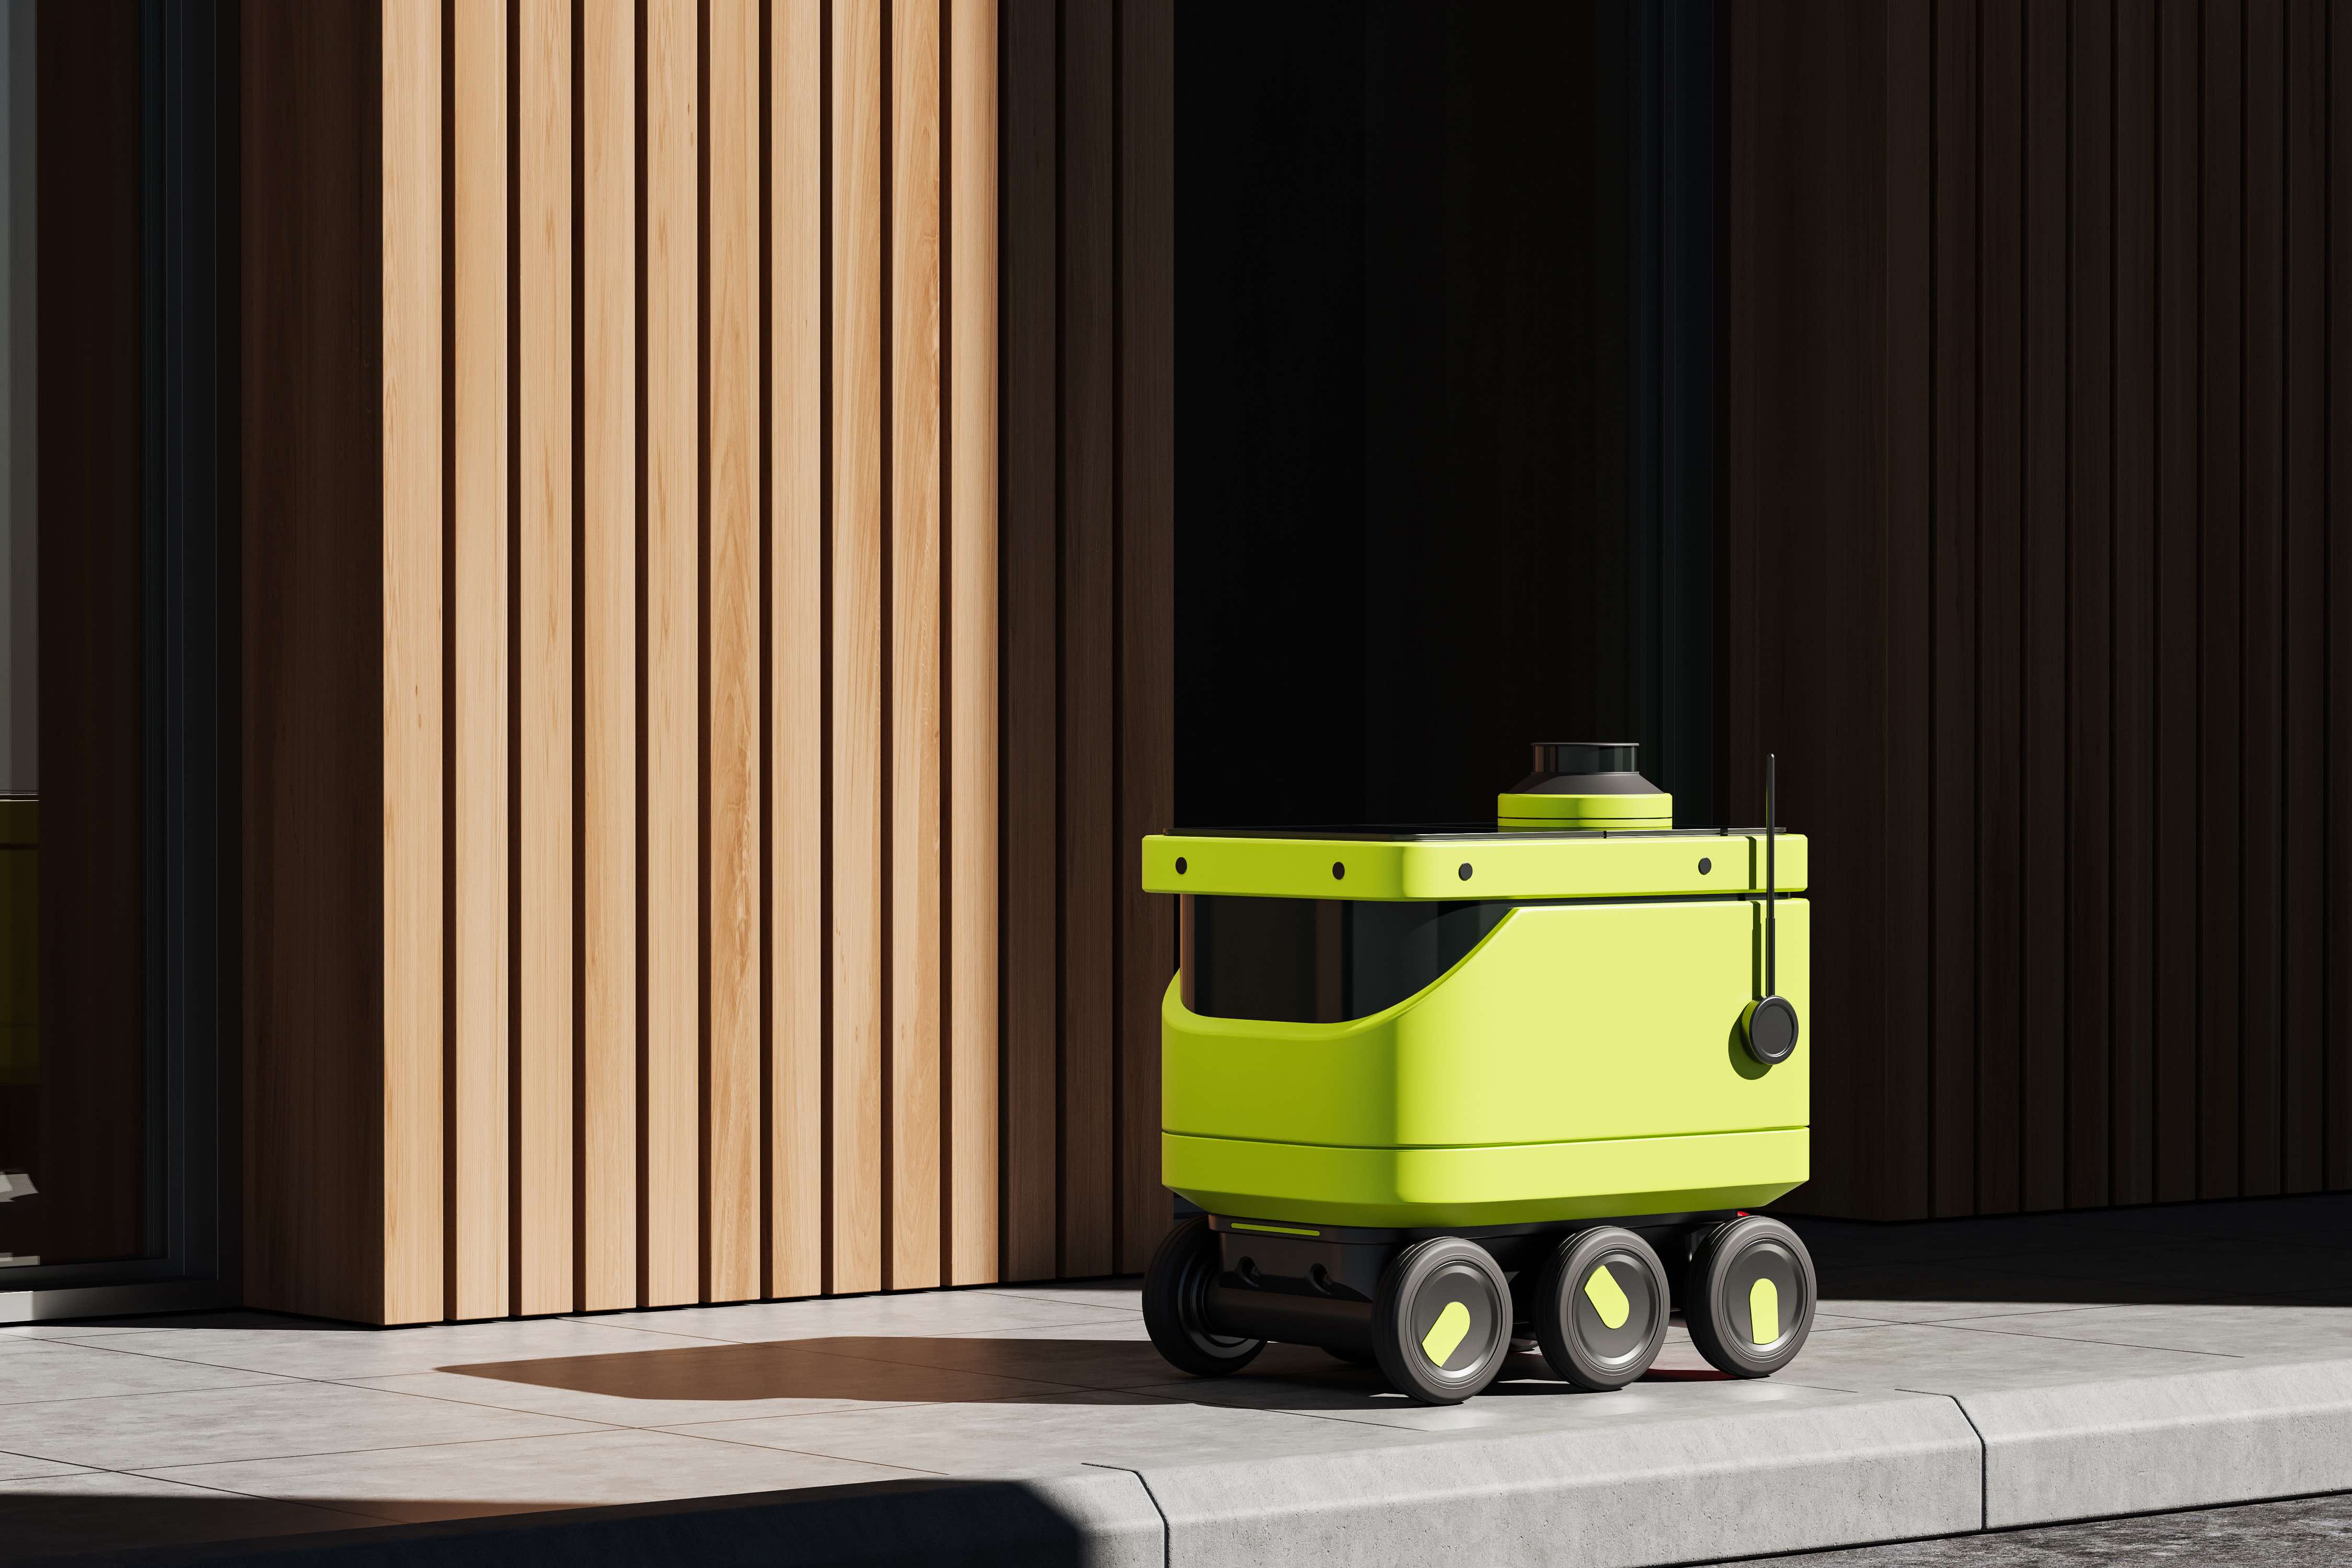 industrial design of yellow delivery robot by Product Design Company speck design